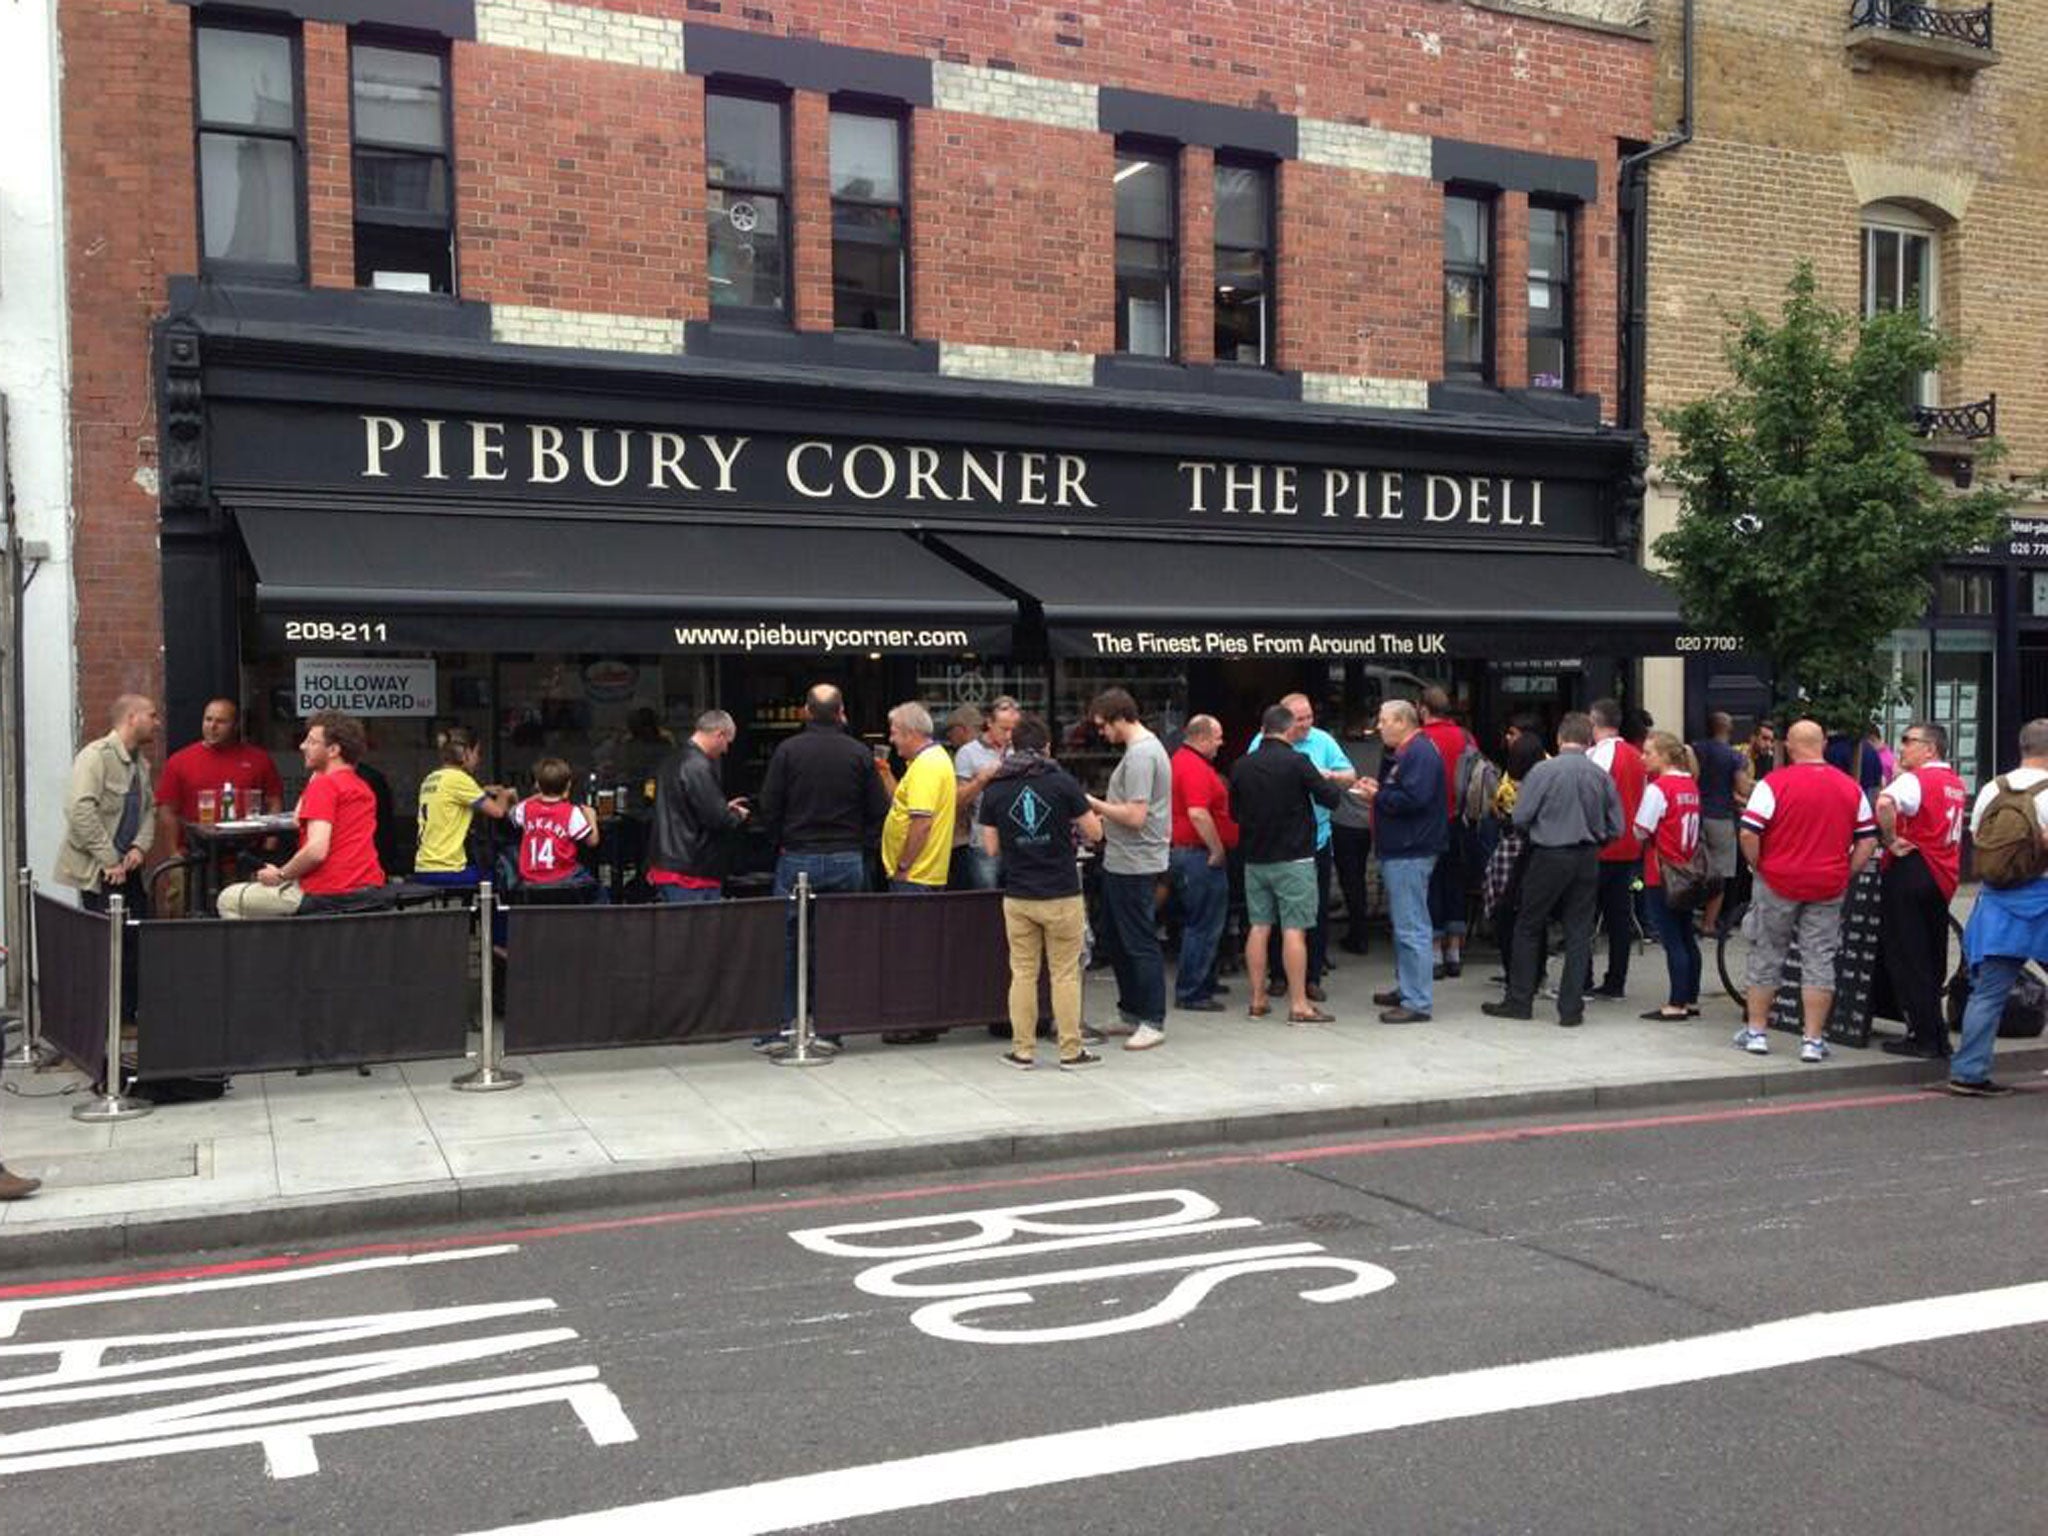 Piebury Corner near the Emirates Stadium in north London, where a group of Napoli fans launched an 'unprovoked attack' before a Champions League match last night